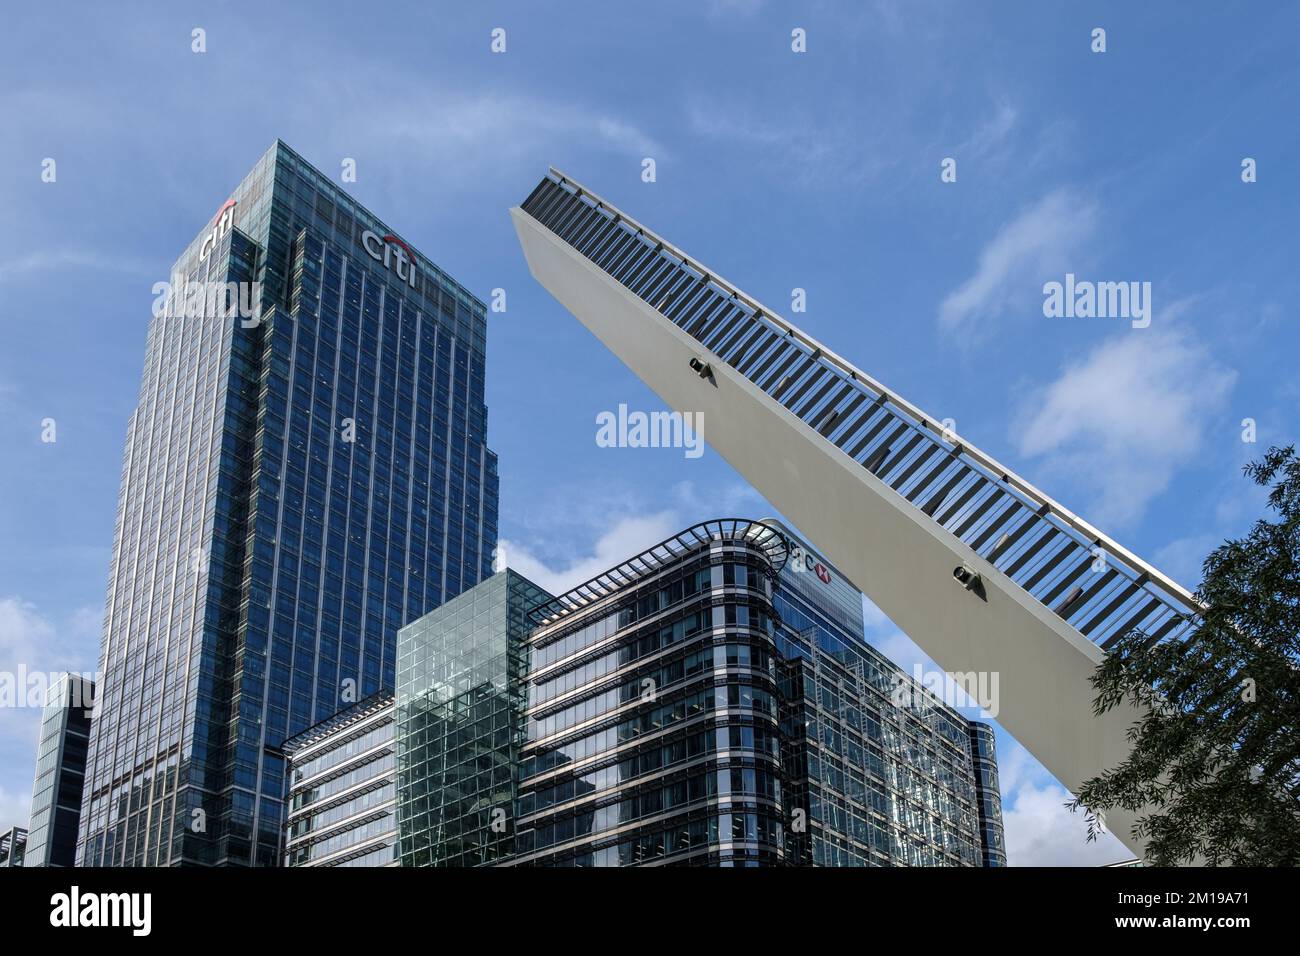 Water Street Bridge opened with tall buildings in background including Citigroup Centre and HSBC, Canary Wharf, London, England. Stock Photo